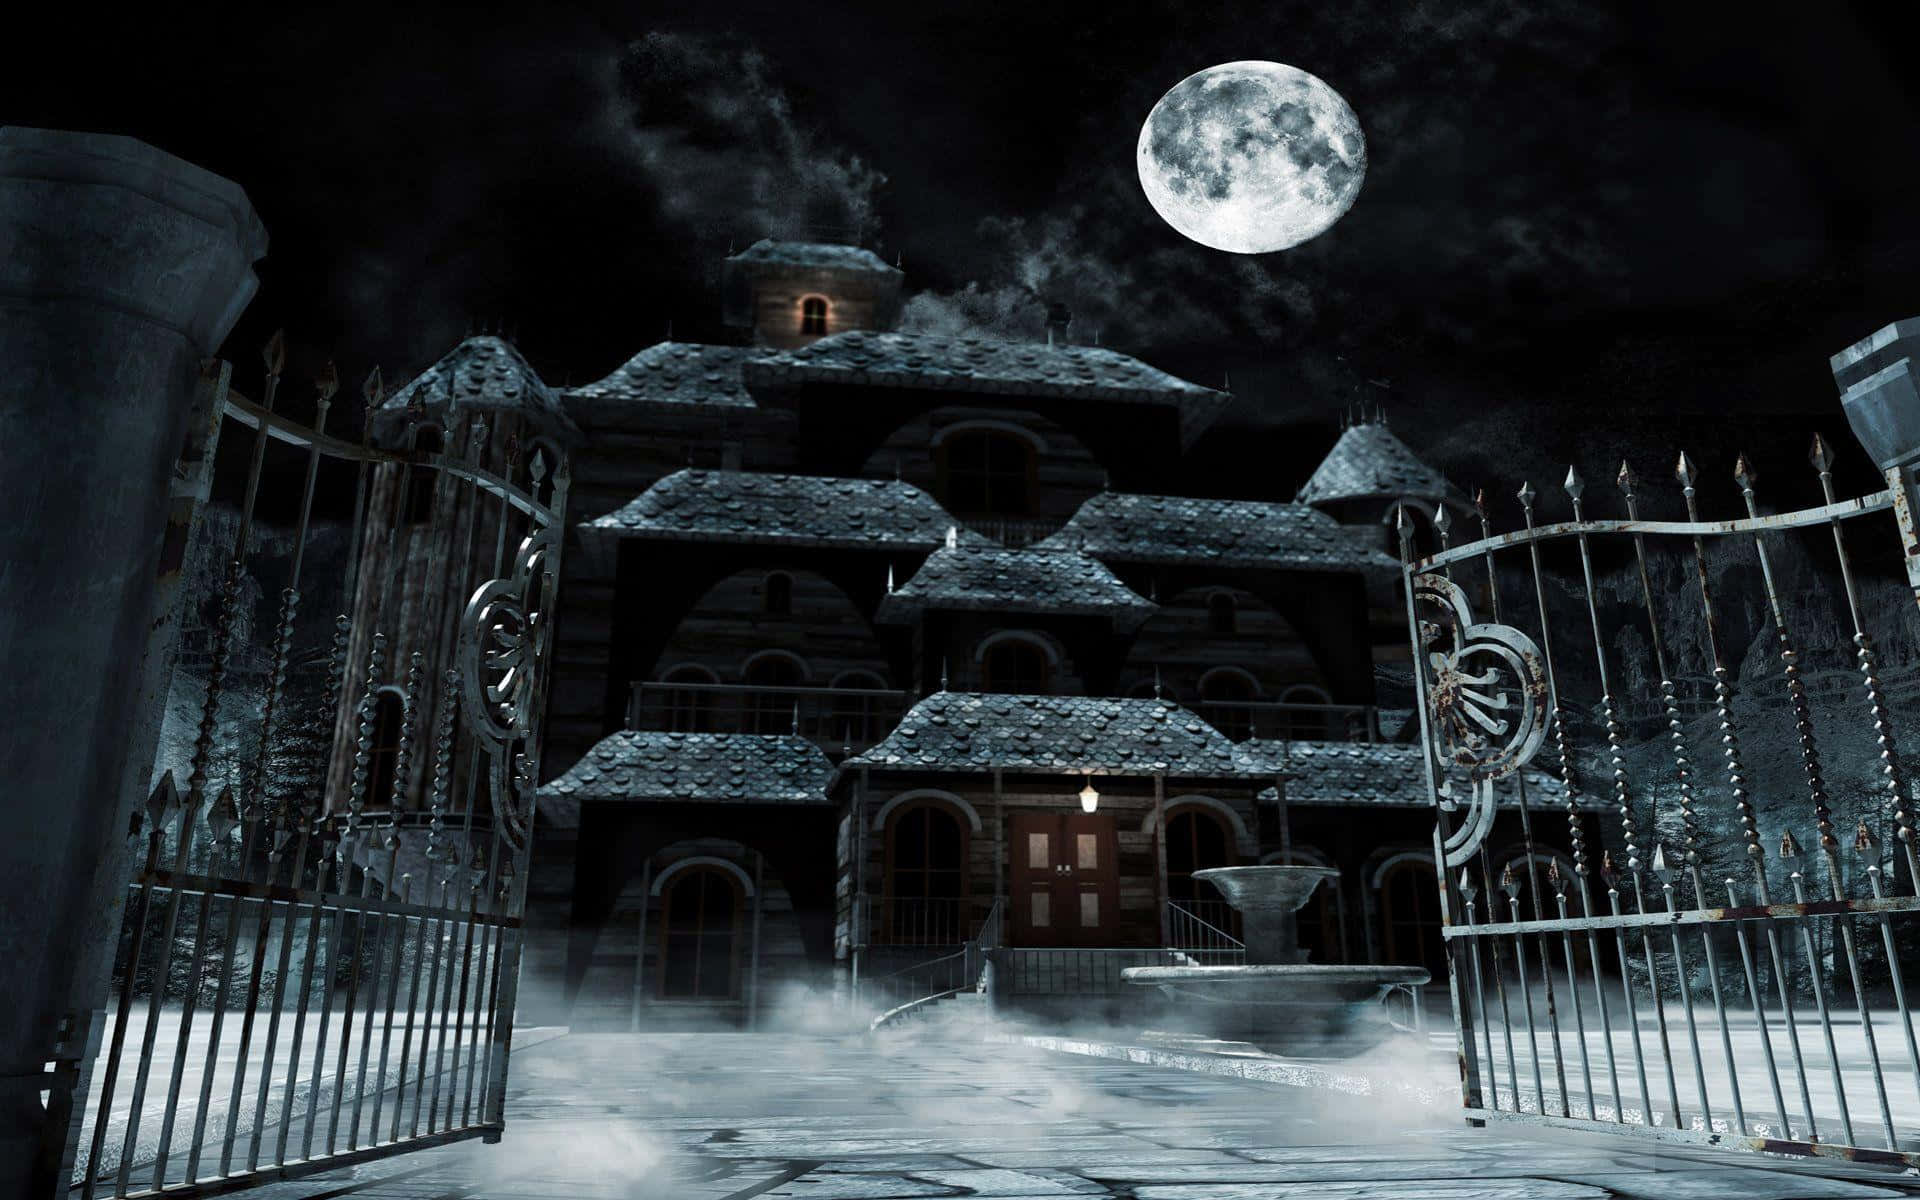 Come explore an old and mysterious Haunted House